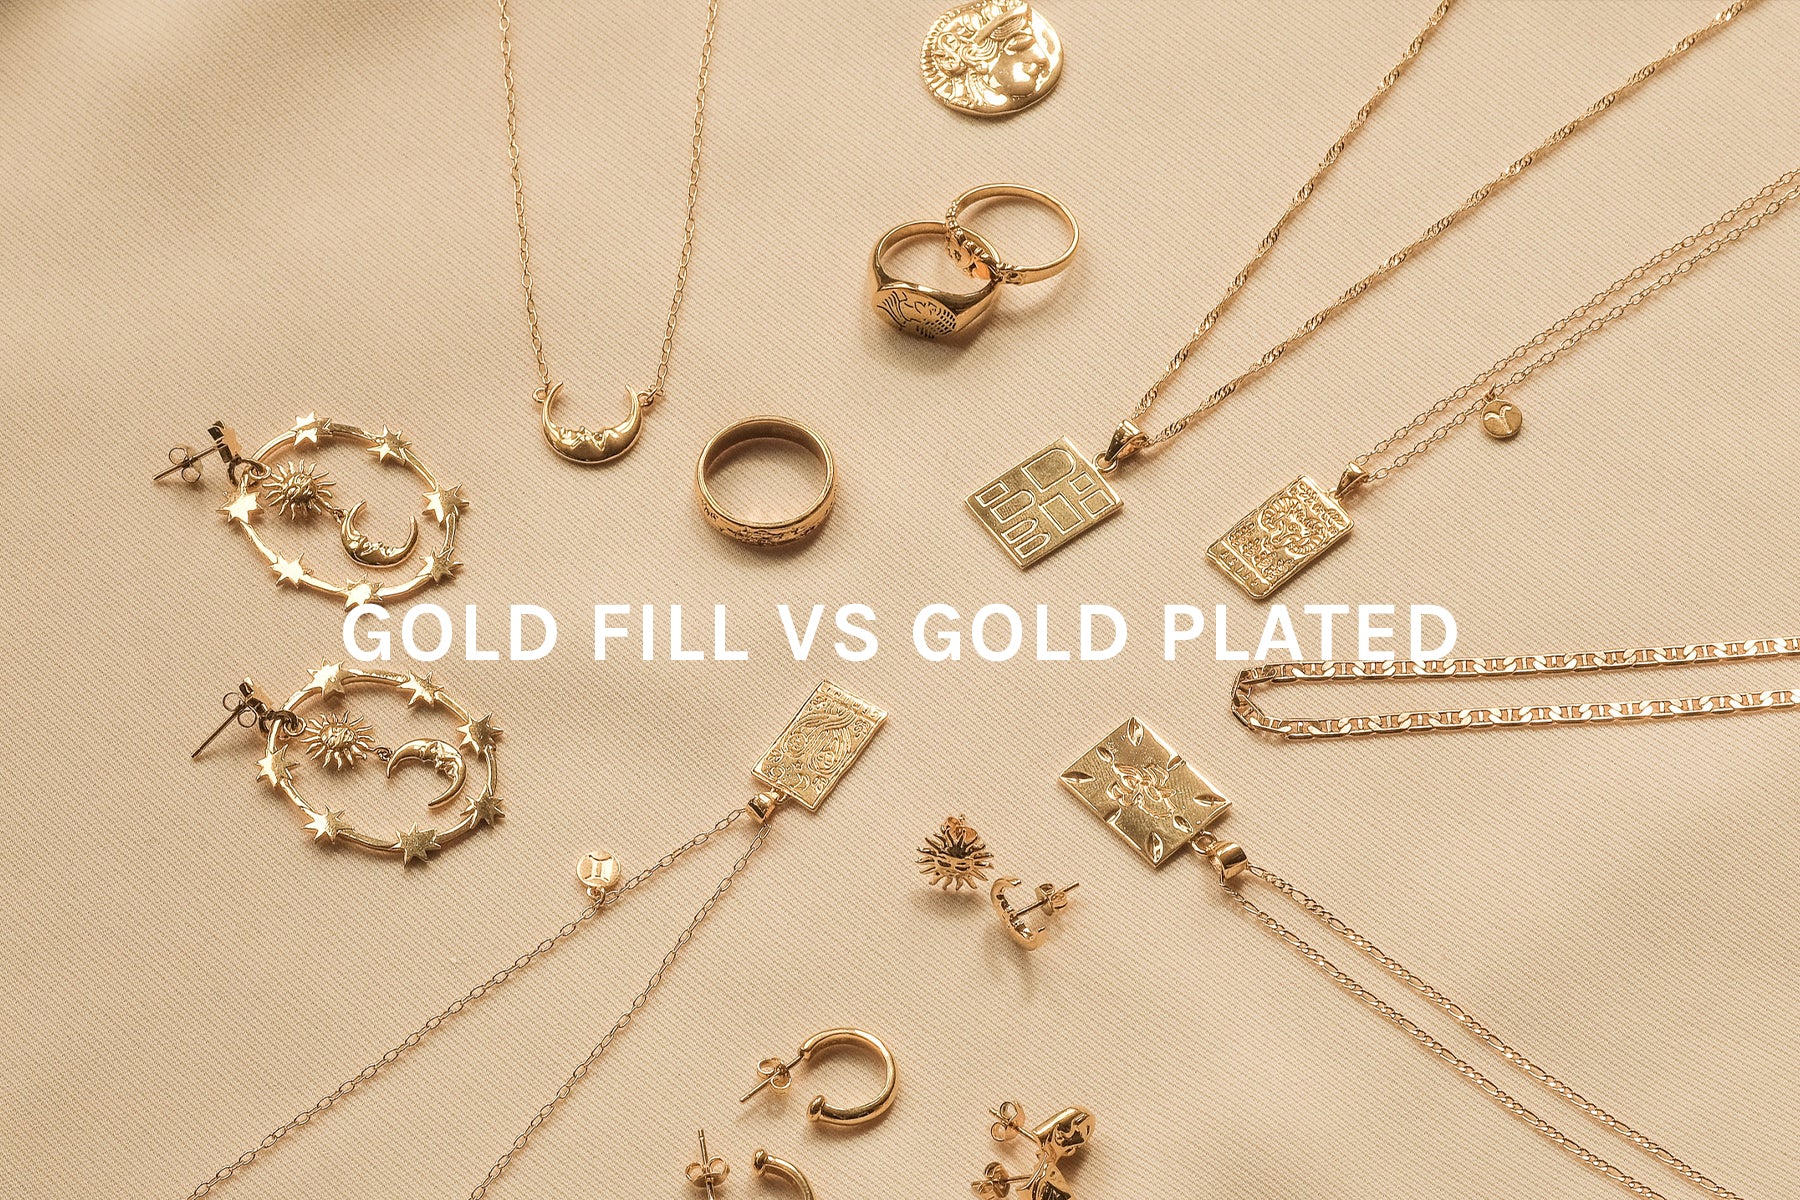 Is Gold Plated Jewelry Worth It? – The GLD Shop